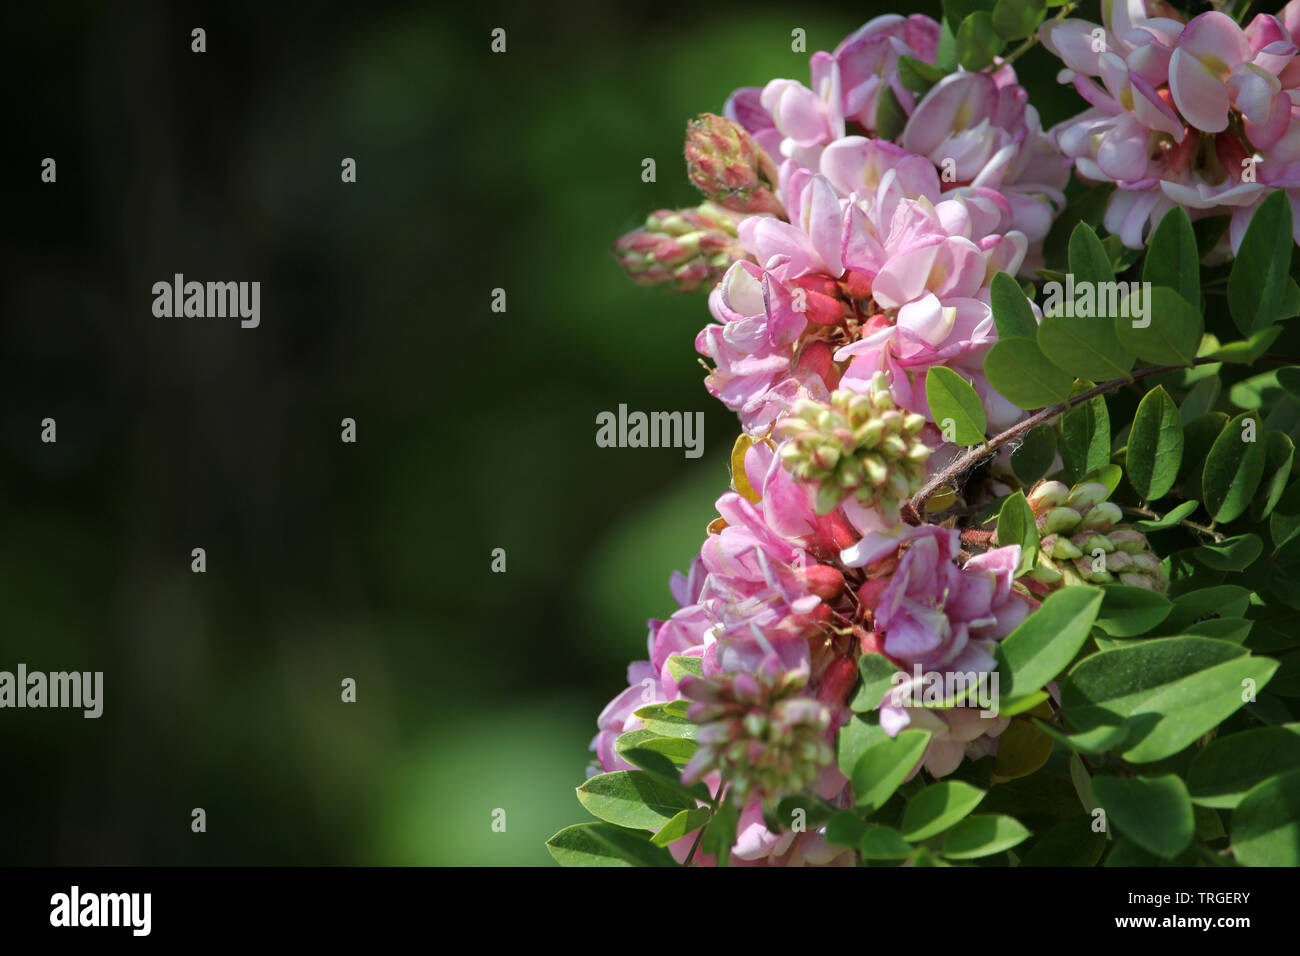 Blooming rose acacia bunch close up spring background. Spring branch with clammy locust (Robinia Viscosa or Robinia hispida) flowers. Stock Photo